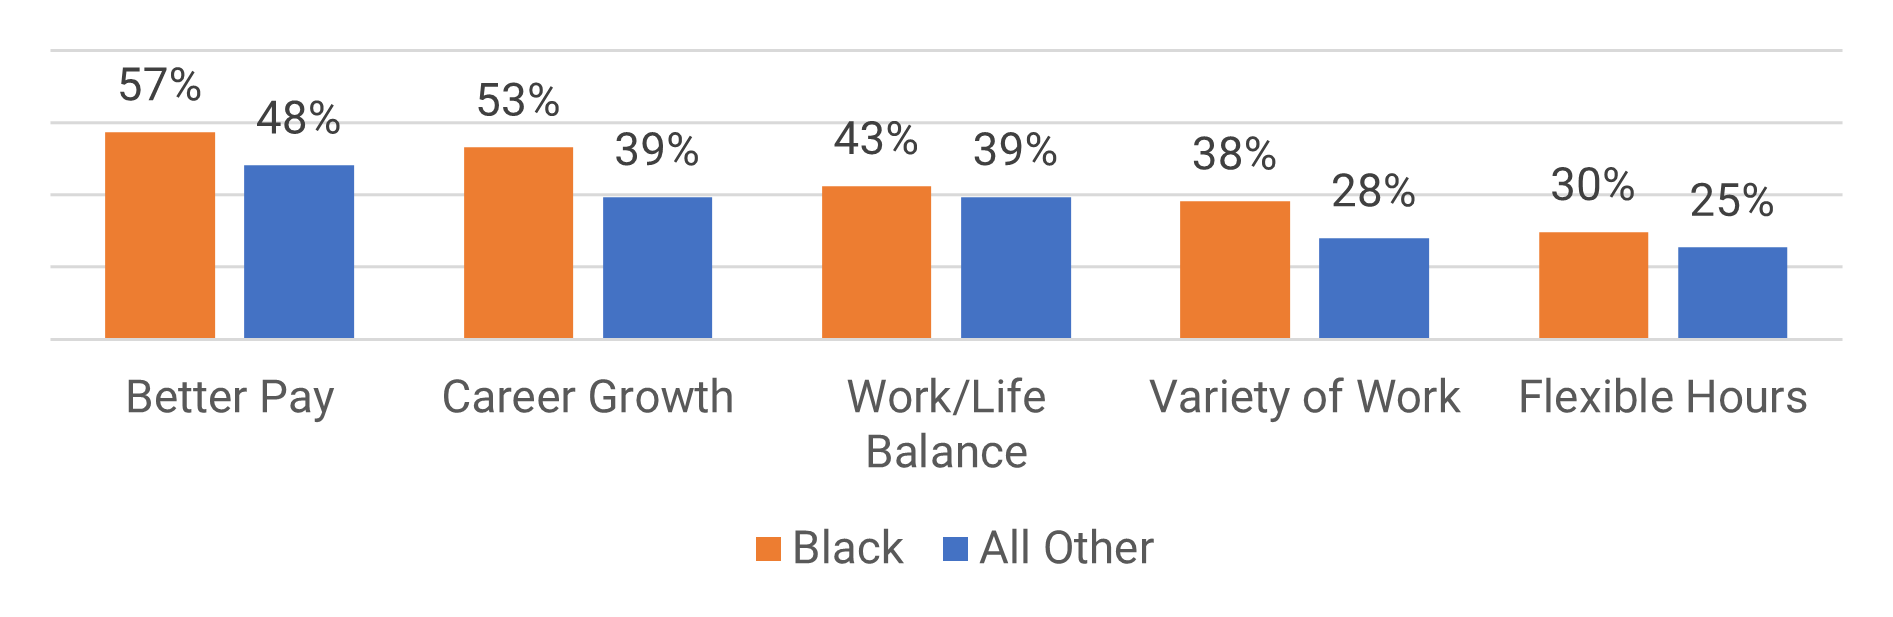 A bar graph showing rankings for reasons for self employment, sorted by Black and All Other.